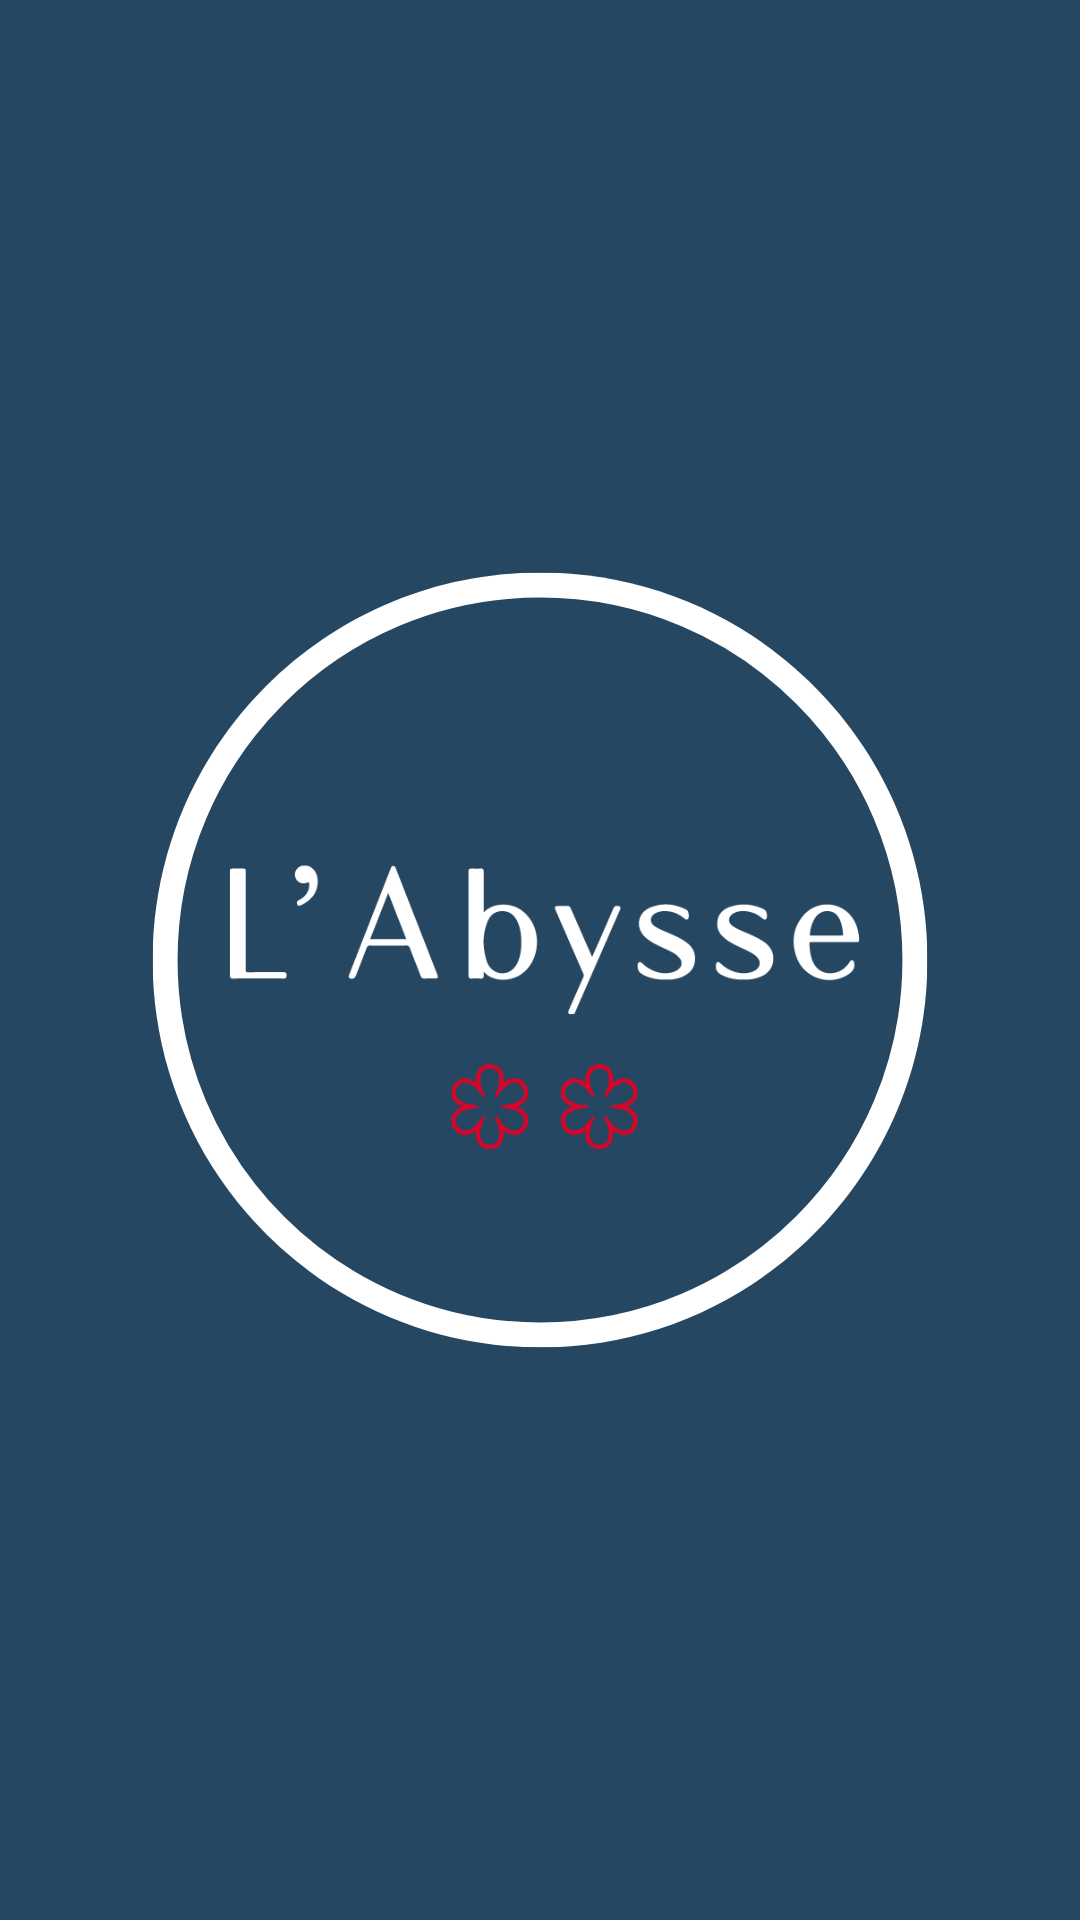 L'Abysse